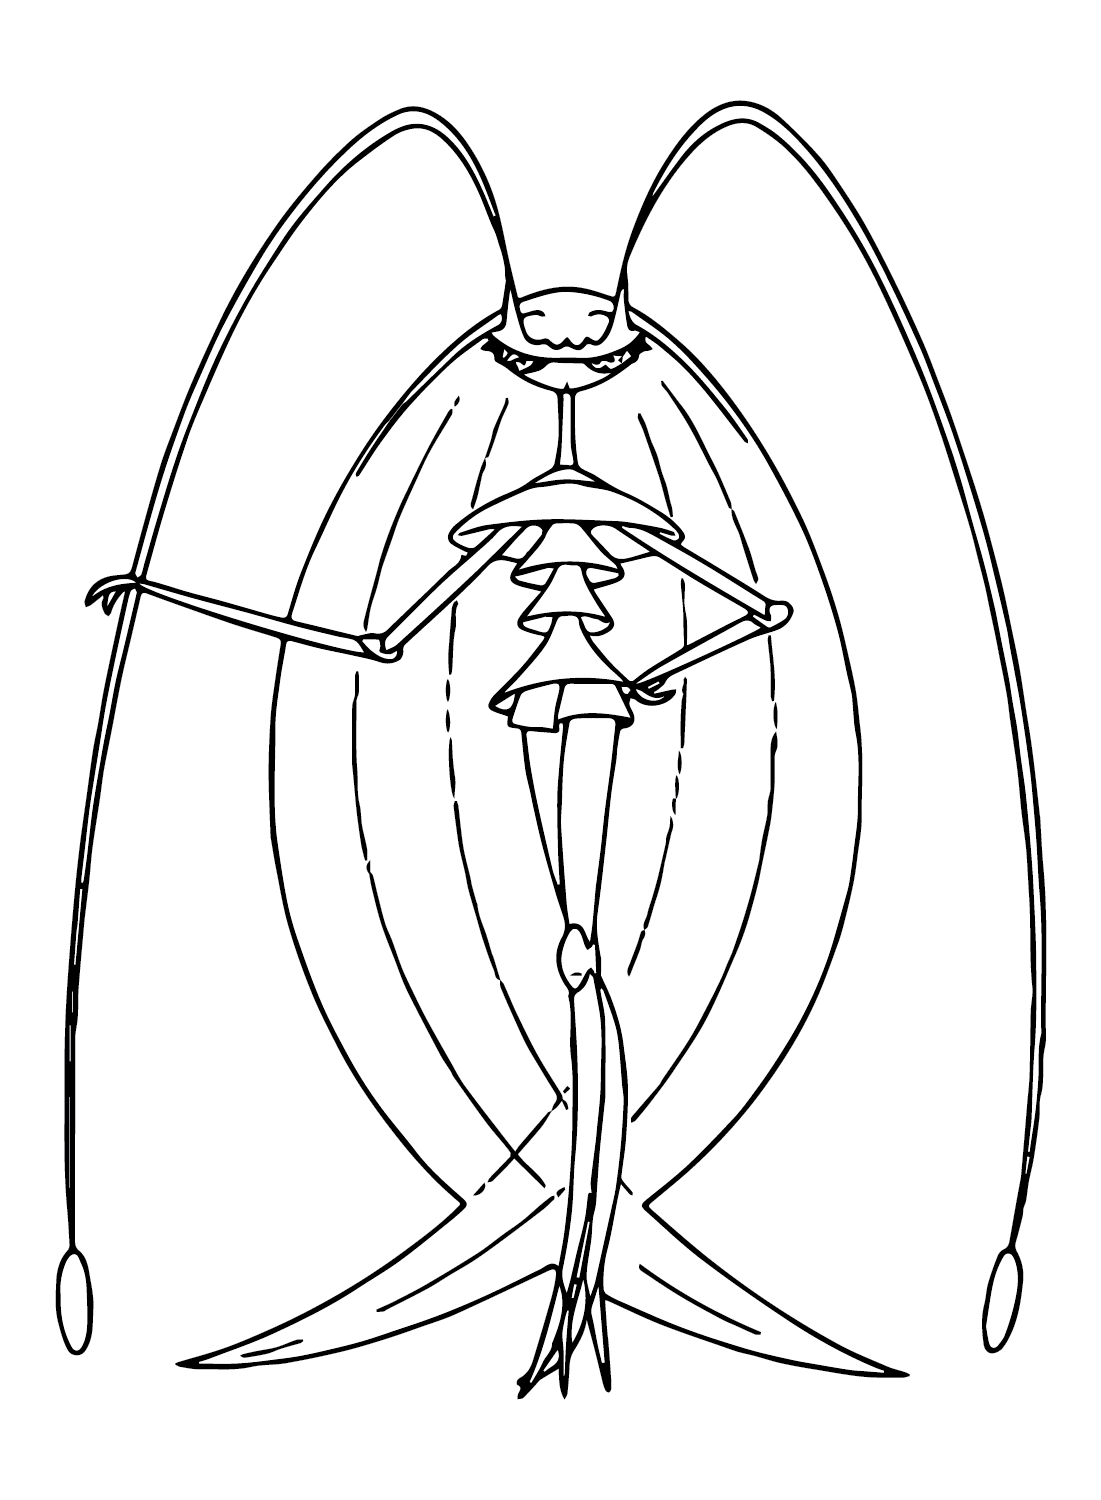 Pheromosa for Kids Coloring Page